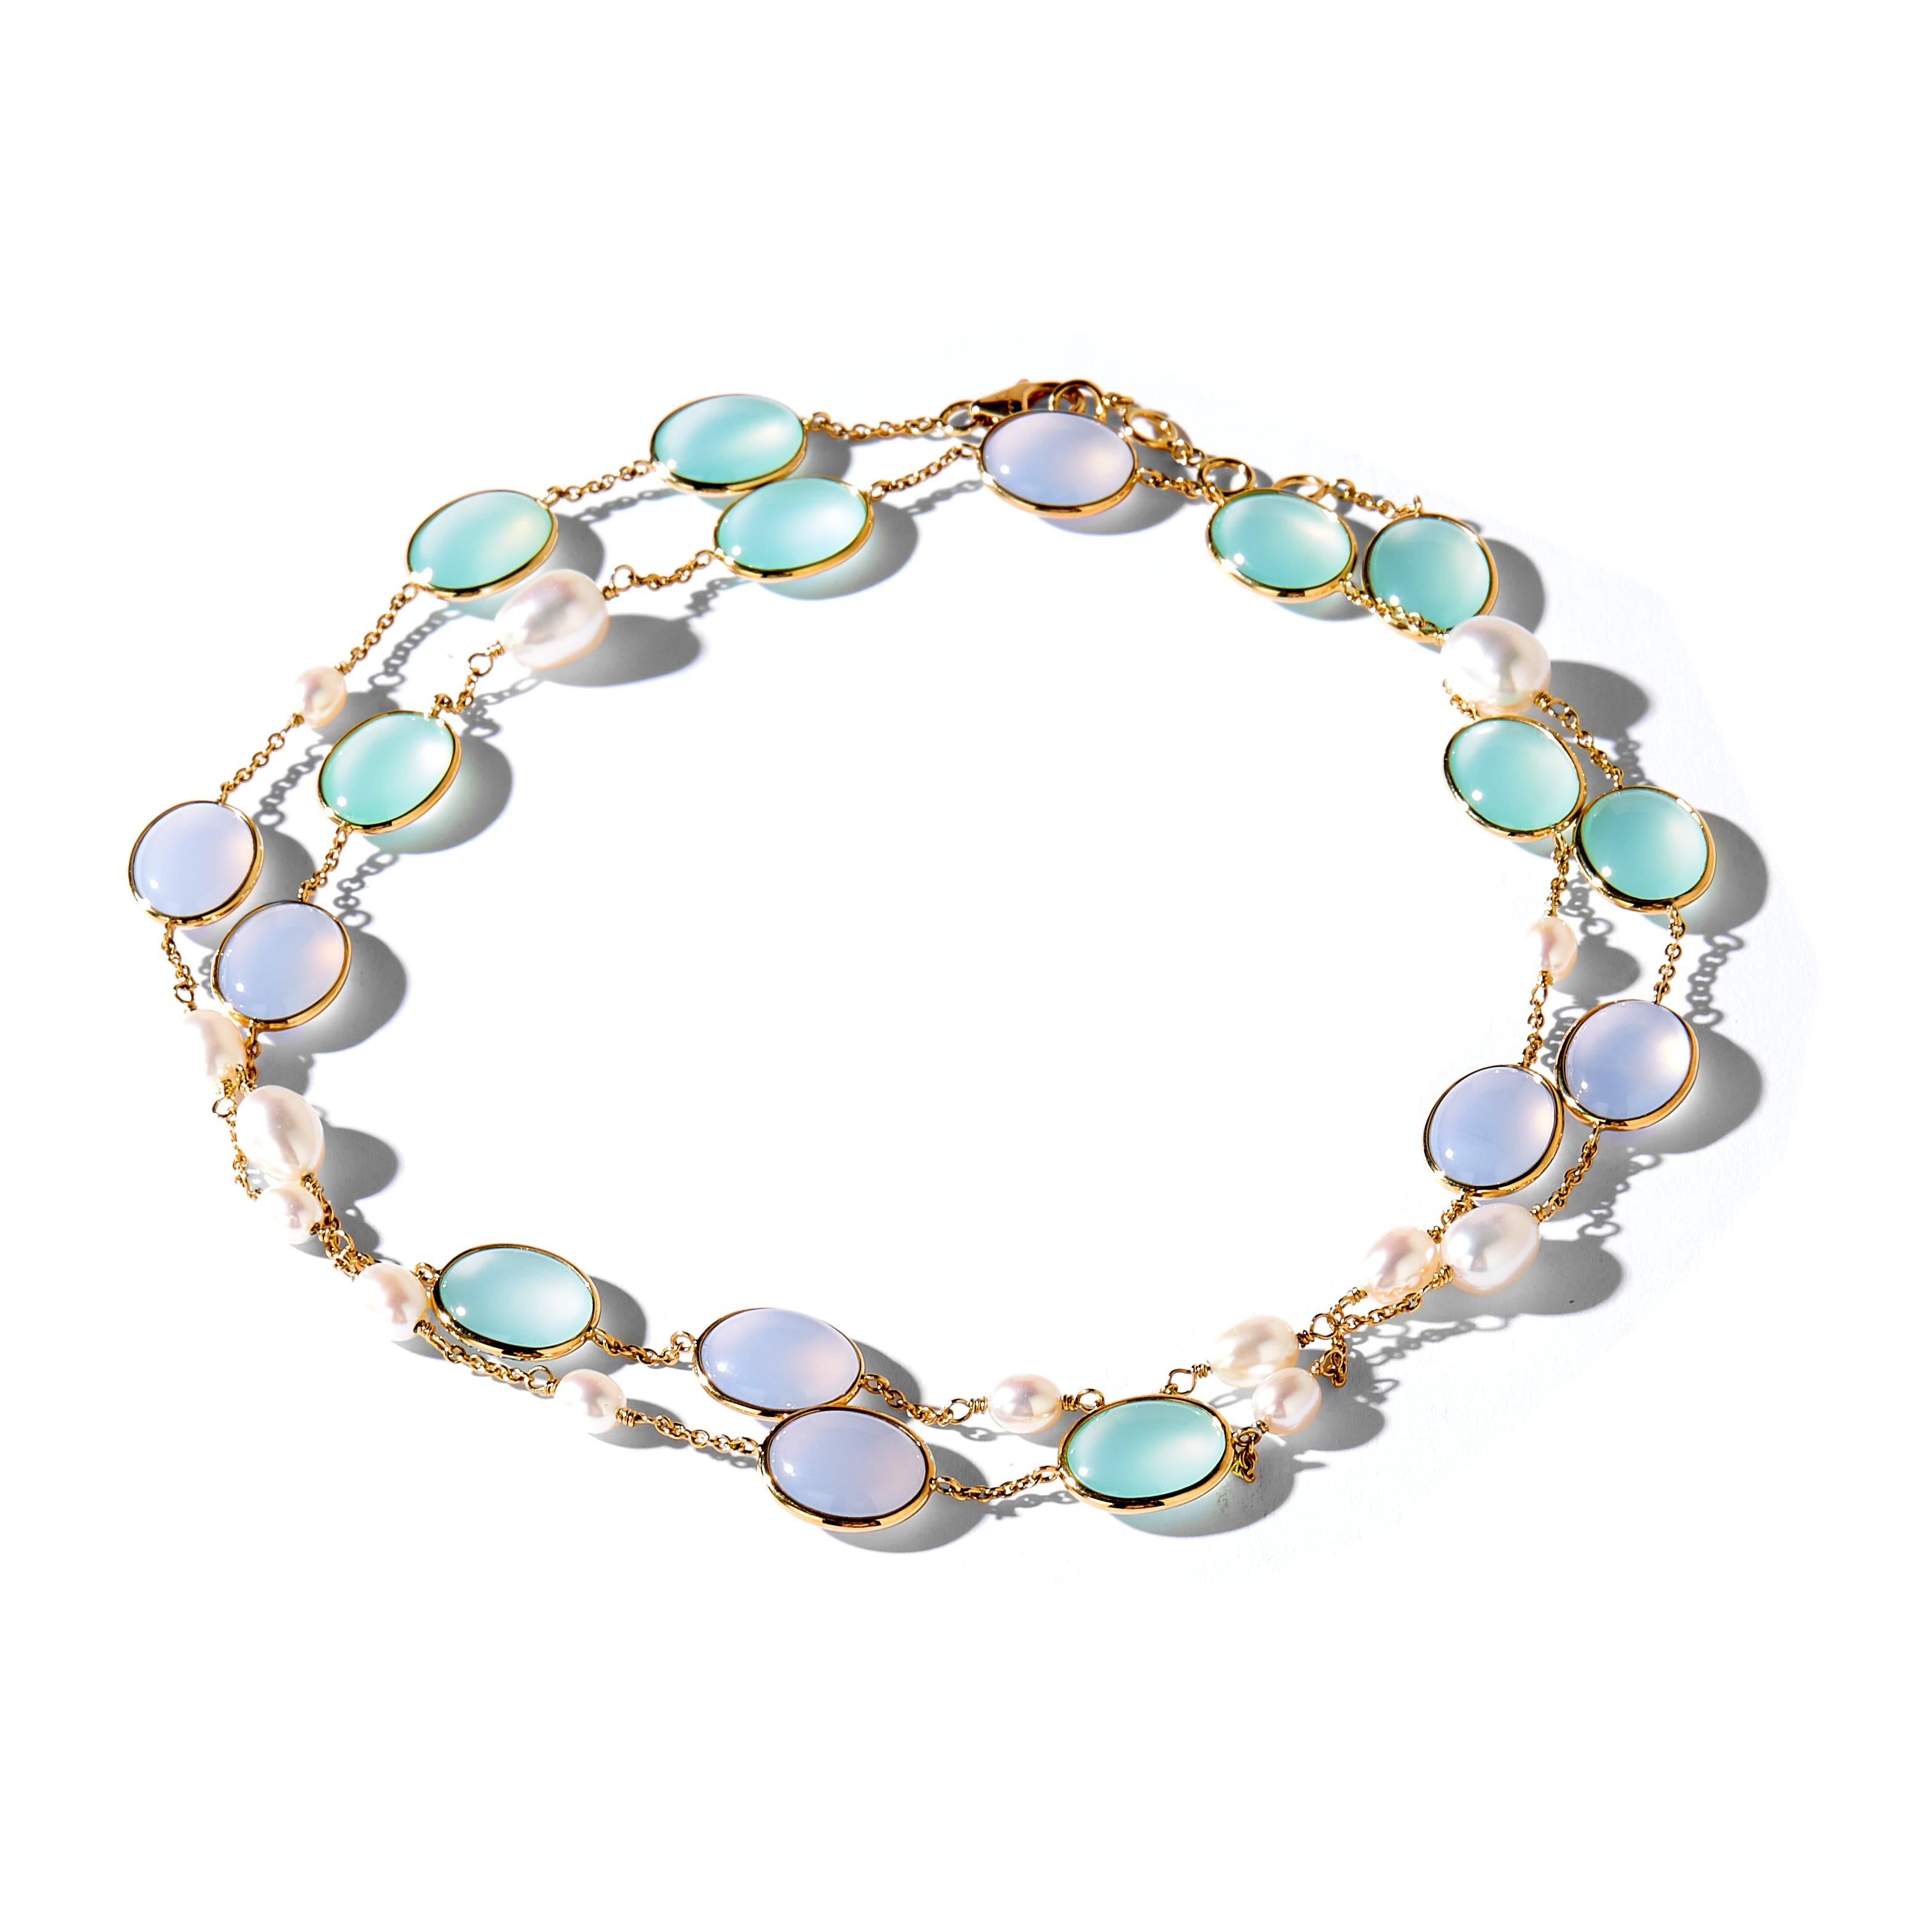 
Created in 18 karat yellow gold
30 inch Necklace
Fresh Water Pearls 27  carats approx.
Blue Chalcedony 37 carats approx.
Sea Green Chalcedony 44 carats approx.

18 karat yellow gold lobster clasp with sizing rings
Limited Edition 

About the